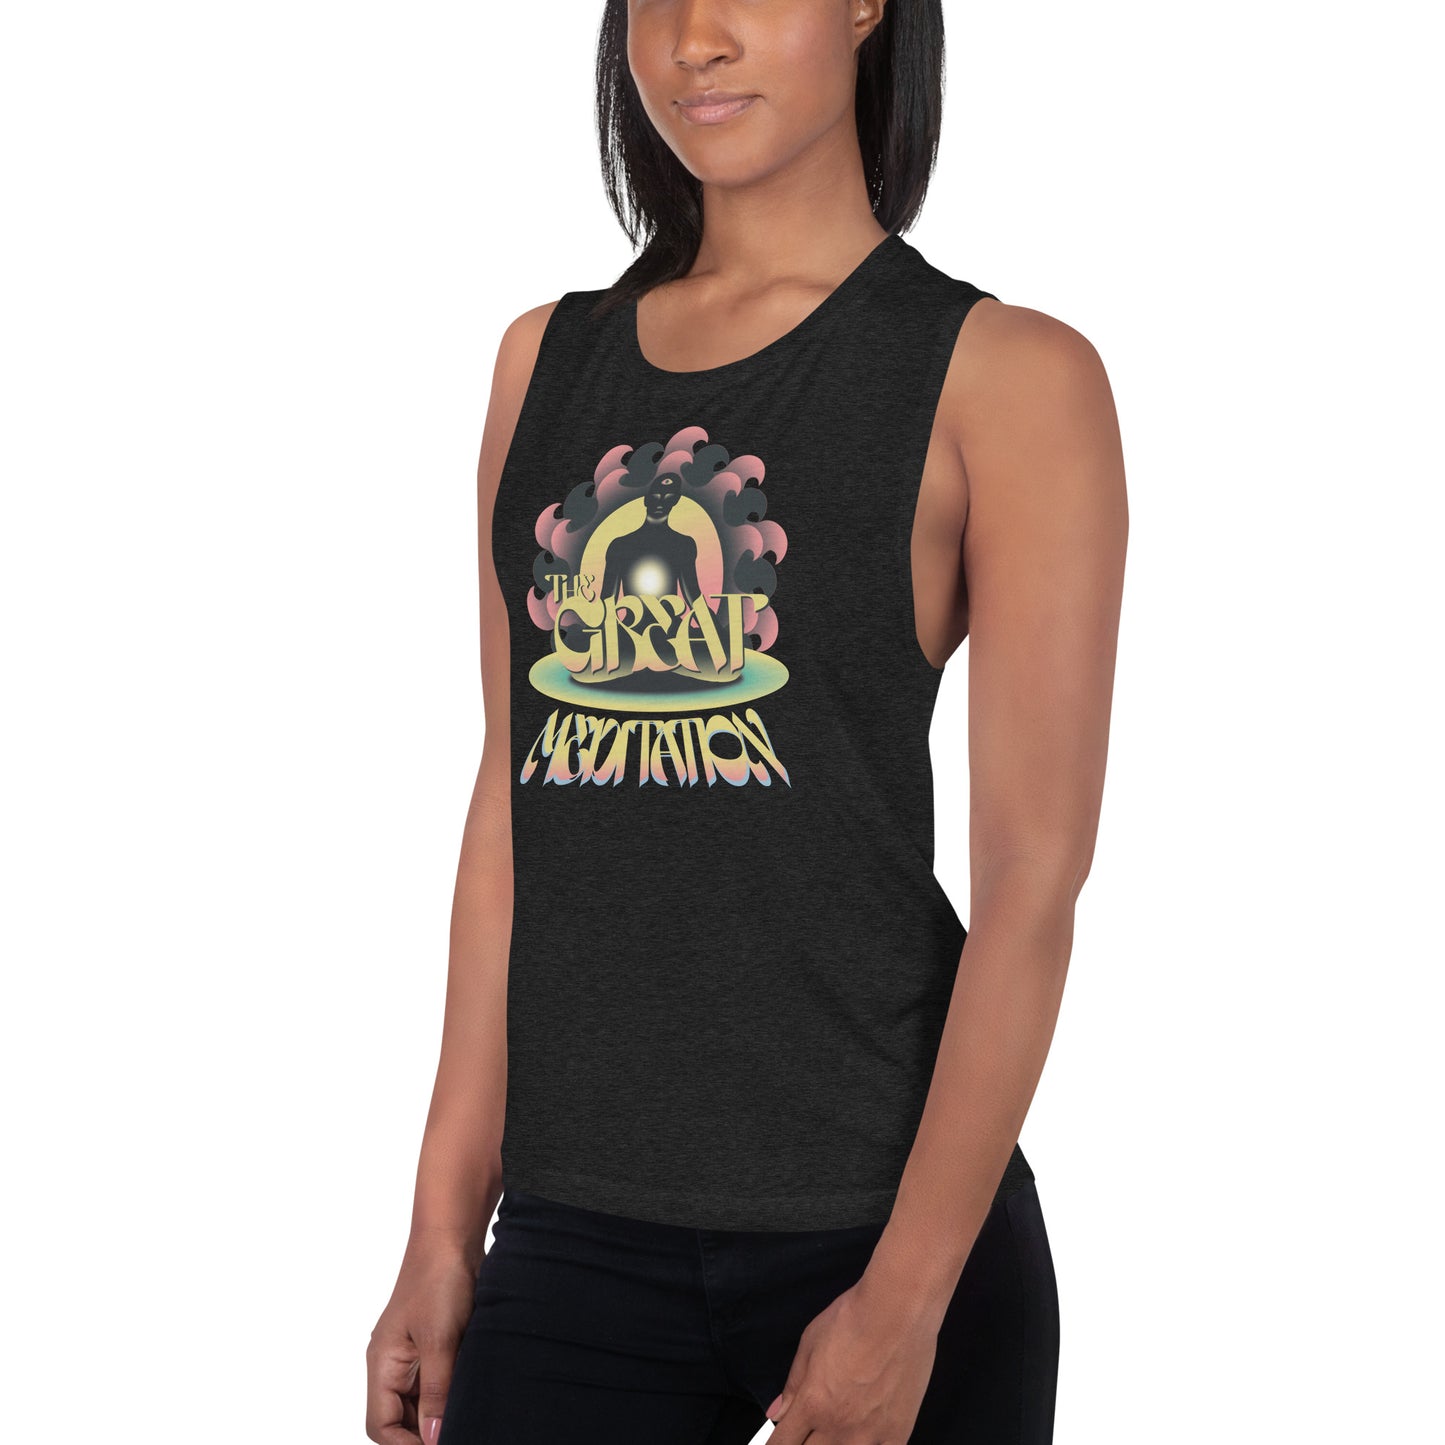 The Great Meditation Logo Ladies’ Muscle Tank